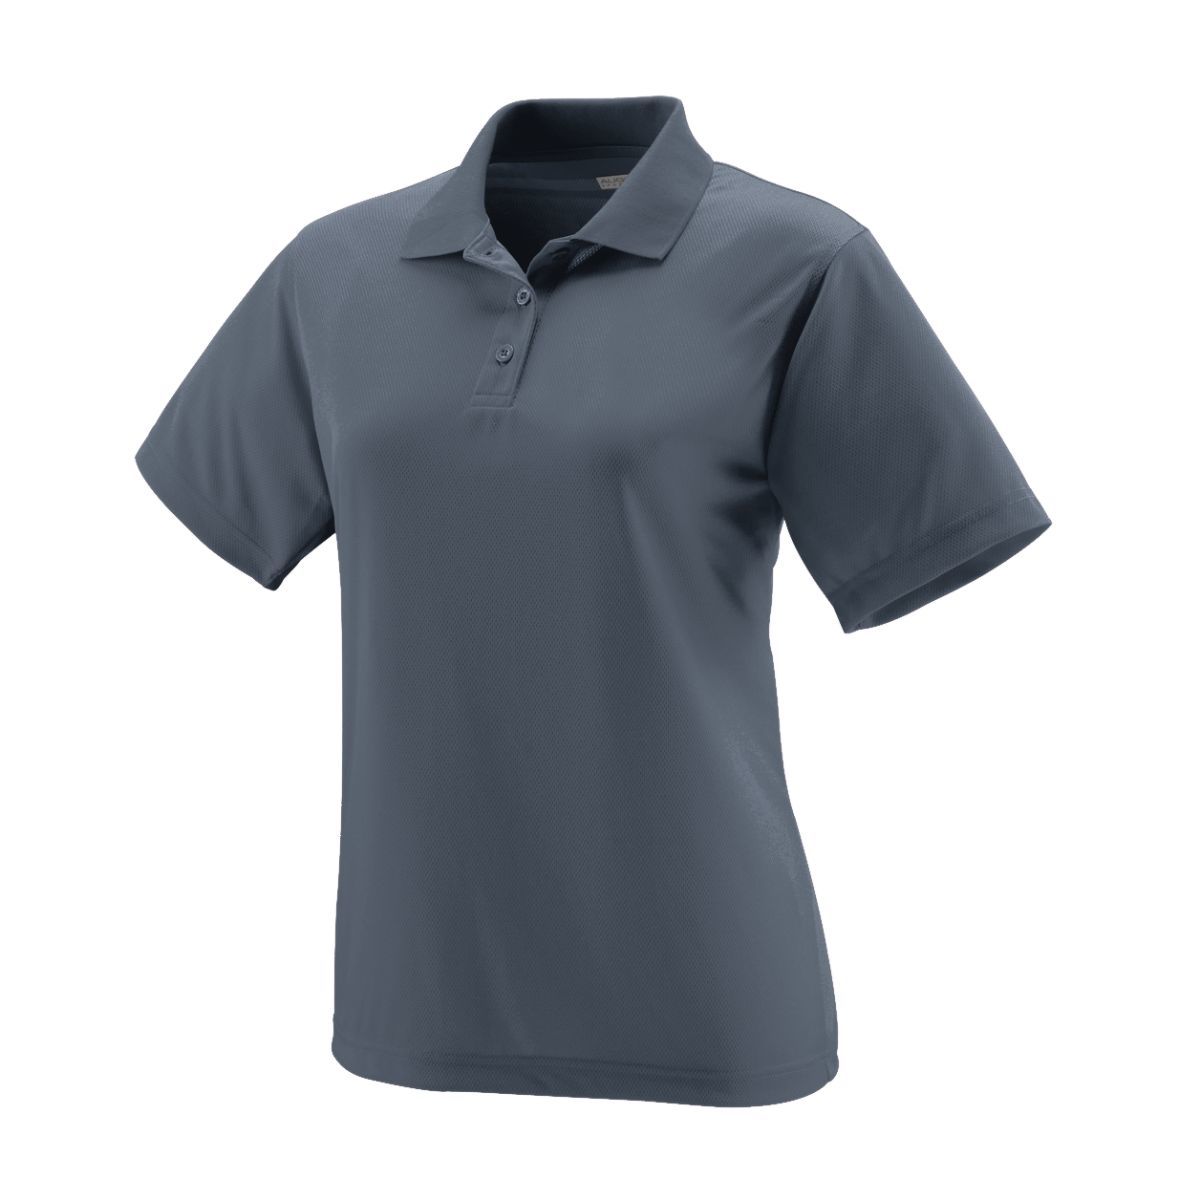 Augusta Sportswear Ladies Wicking Mesh Polo in Graphite  -Part of the Ladies, Ladies-Polo, Polos, Augusta-Products, Tennis, Shirts product lines at KanaleyCreations.com